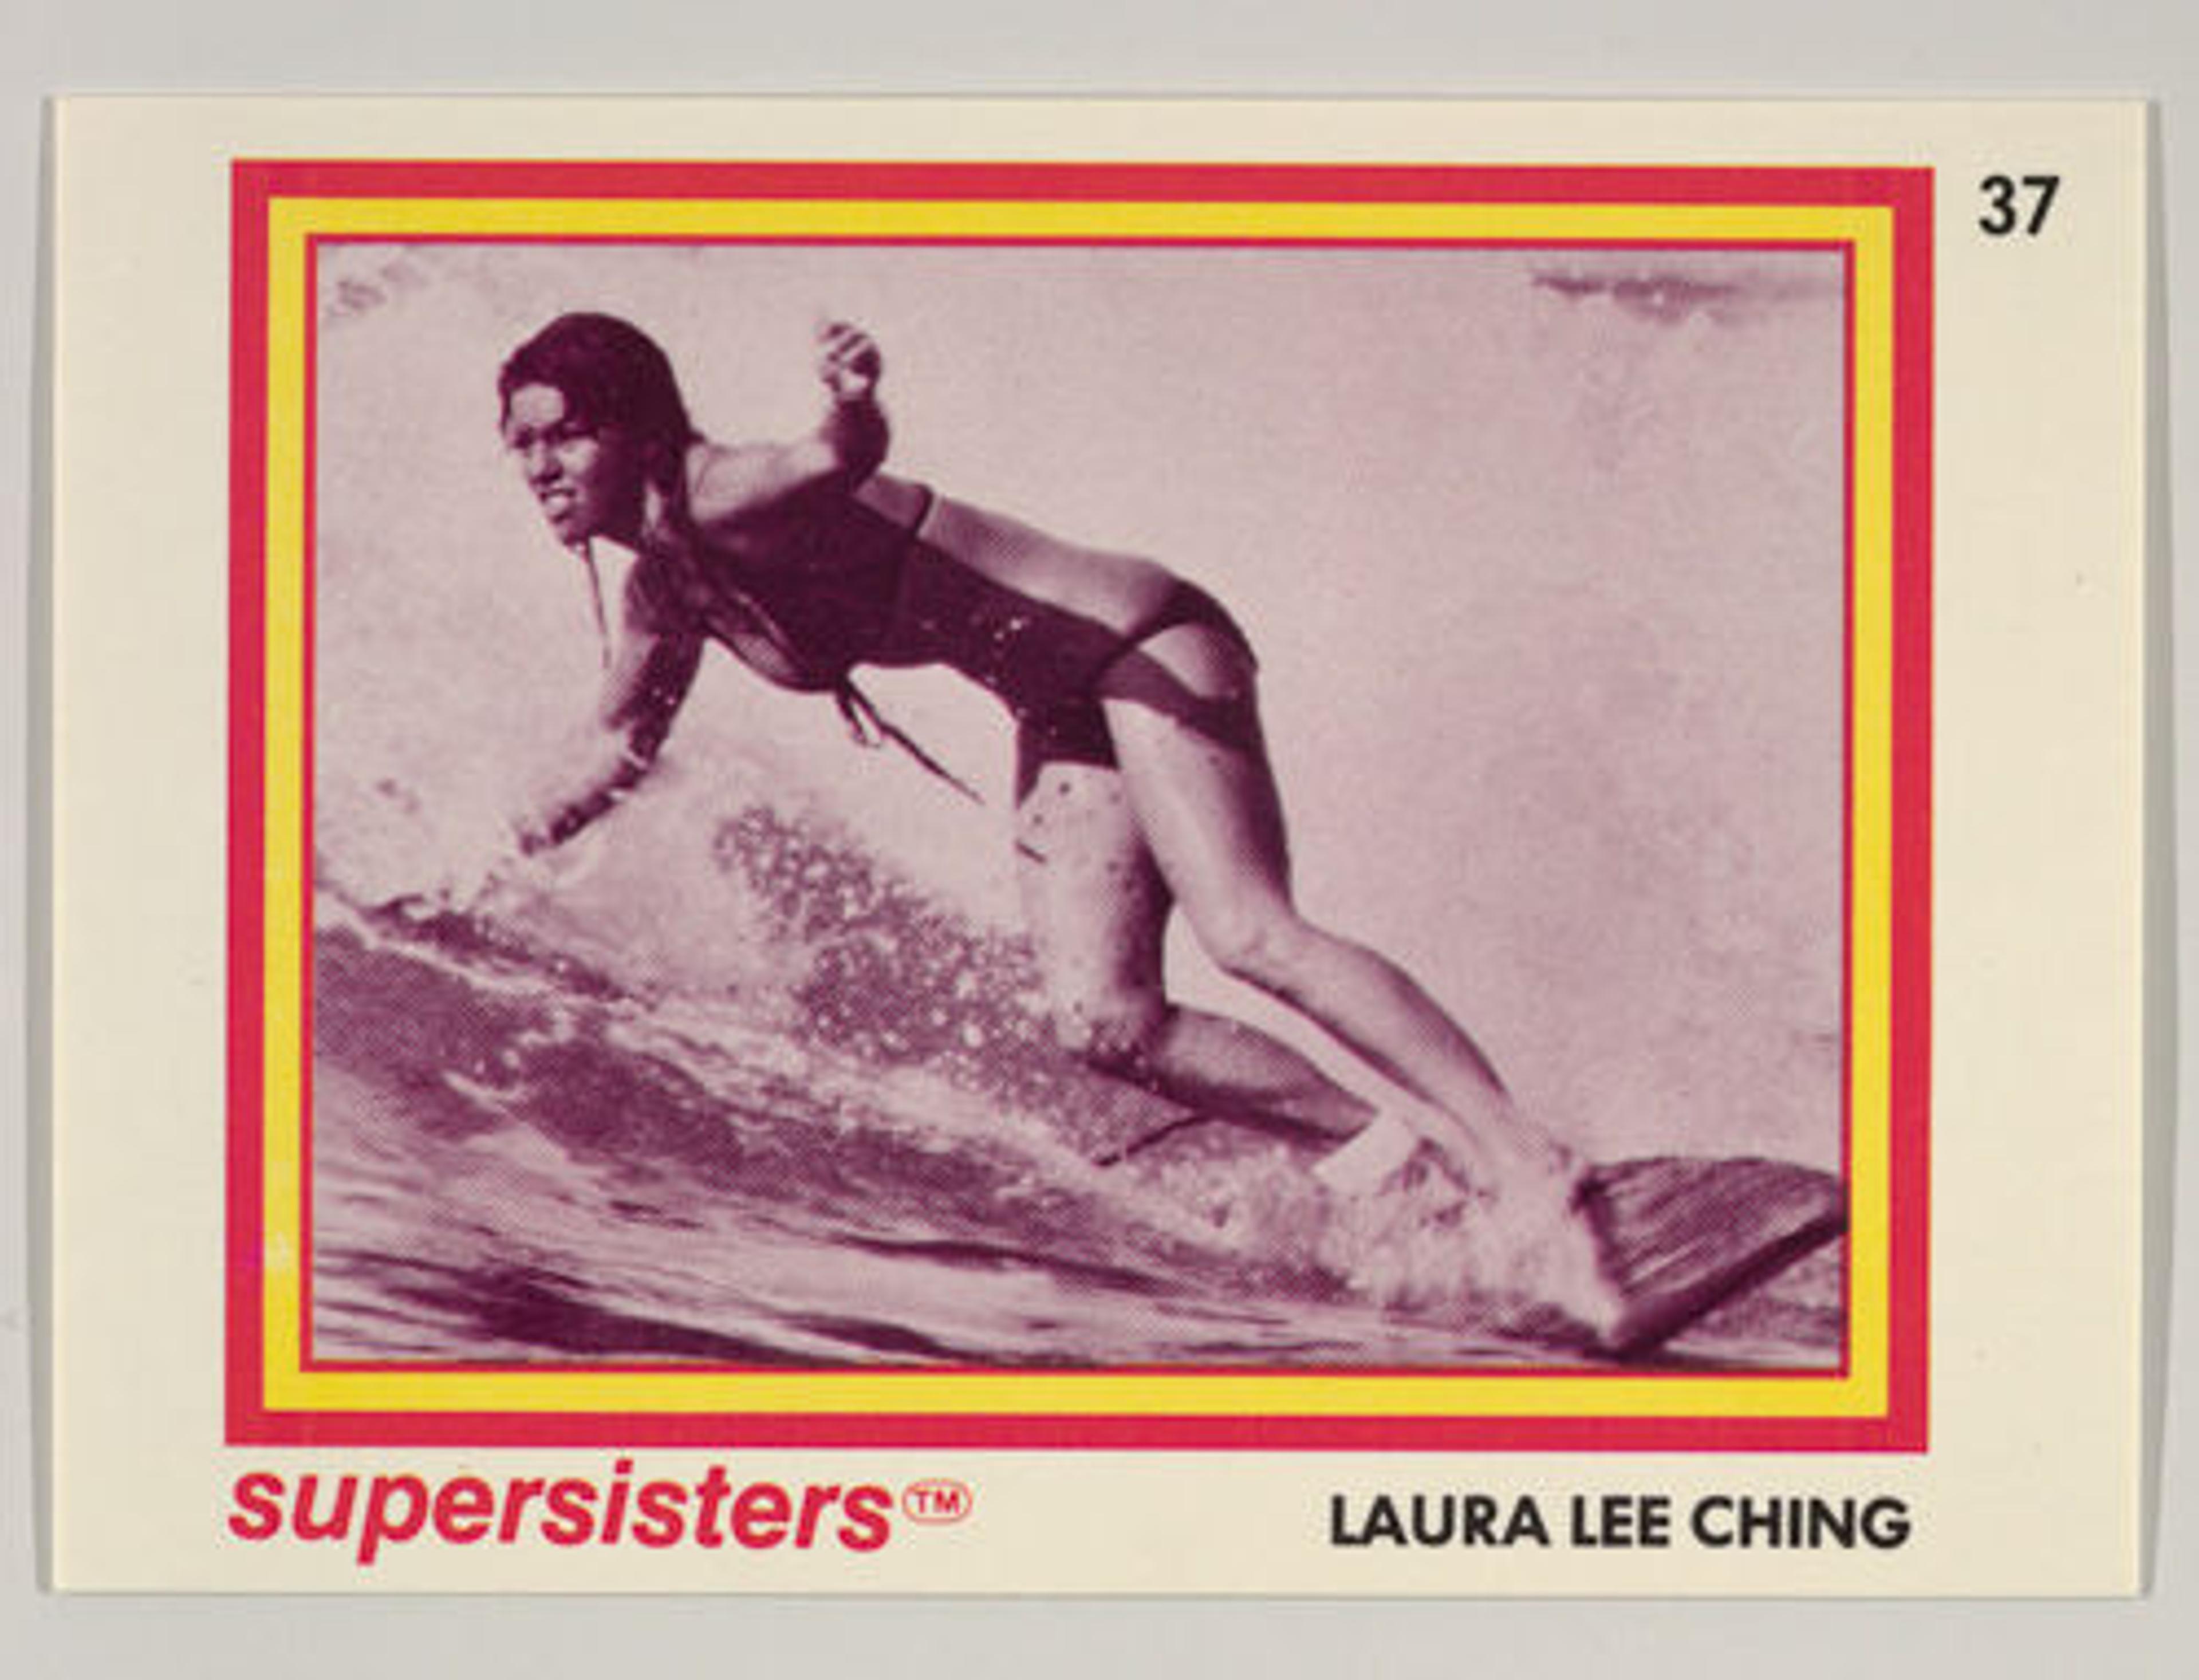 Laura Lee Ching, Supersisters No. 37